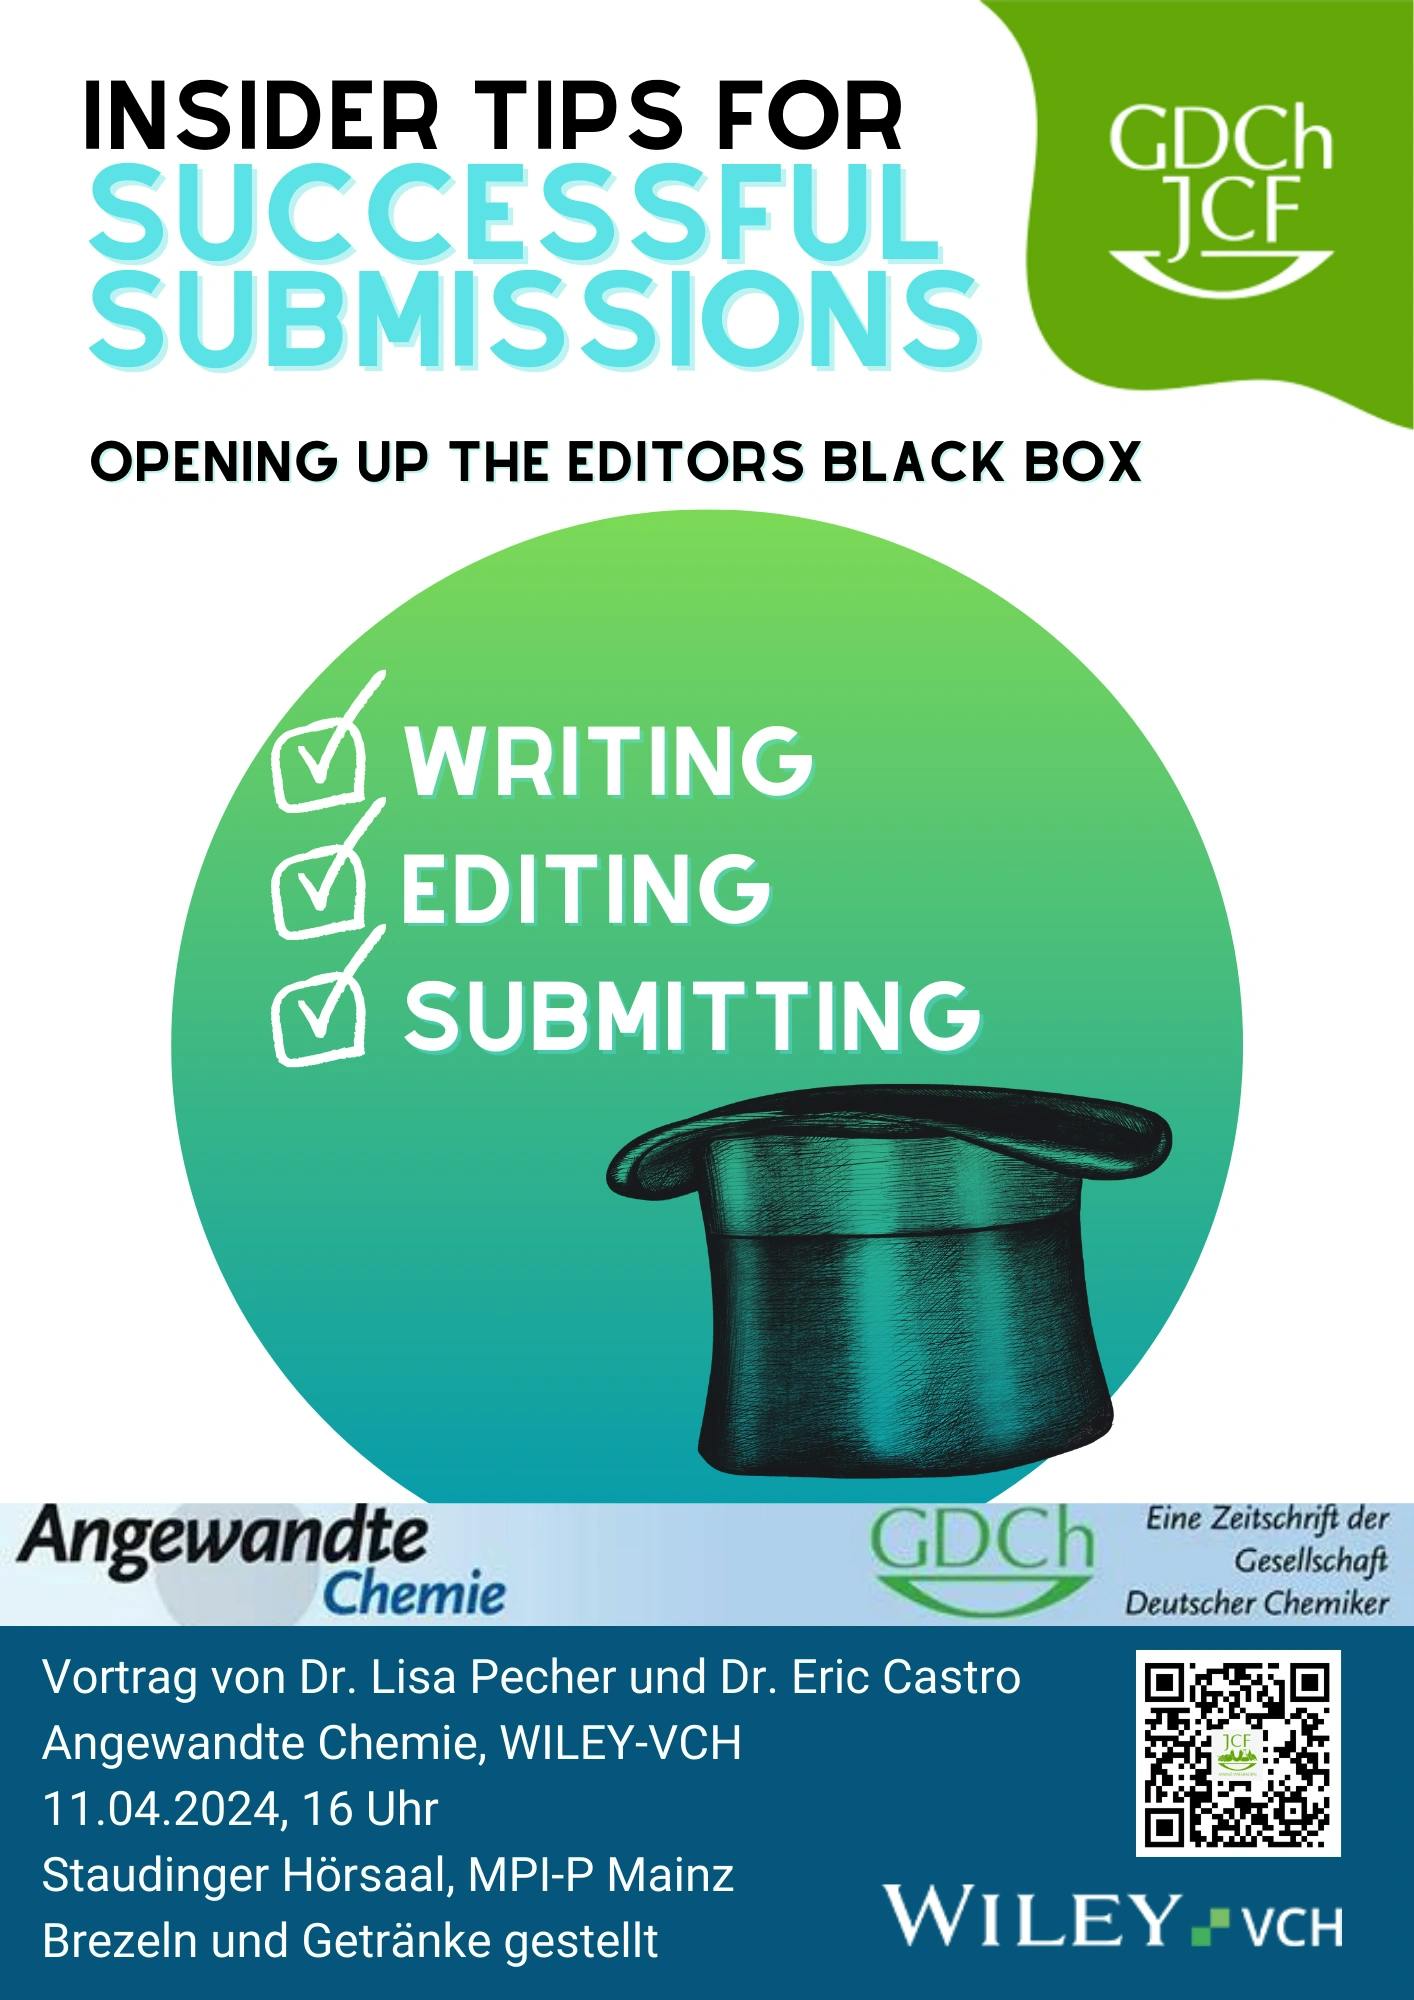 Opening the Editor's Black Box: Insider Tips for Successful Submissions